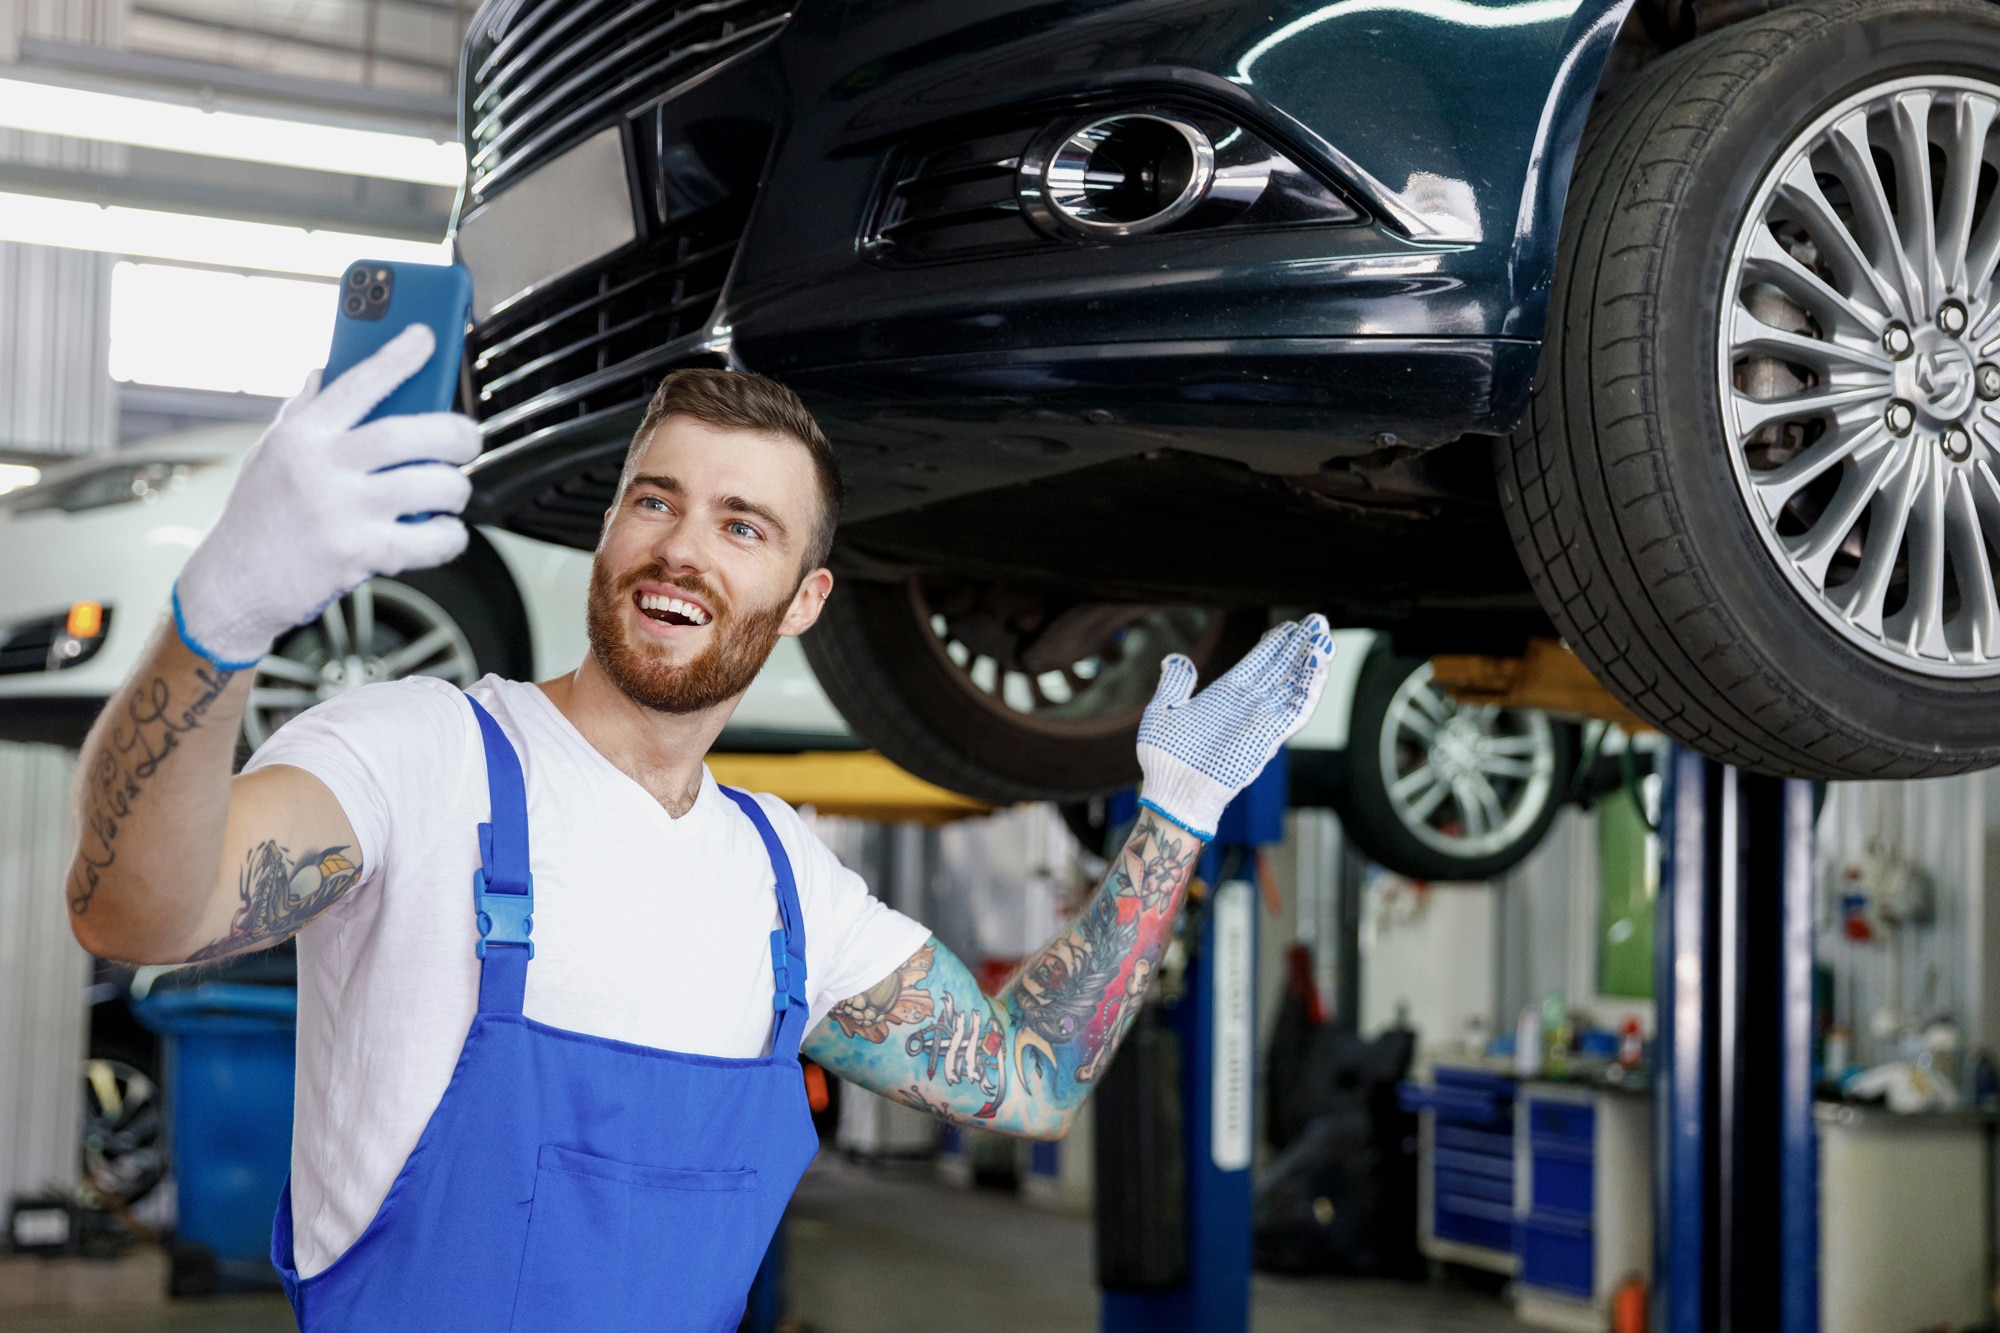 You Paid For a Repair That Didn't Fix Your Car. Now What?